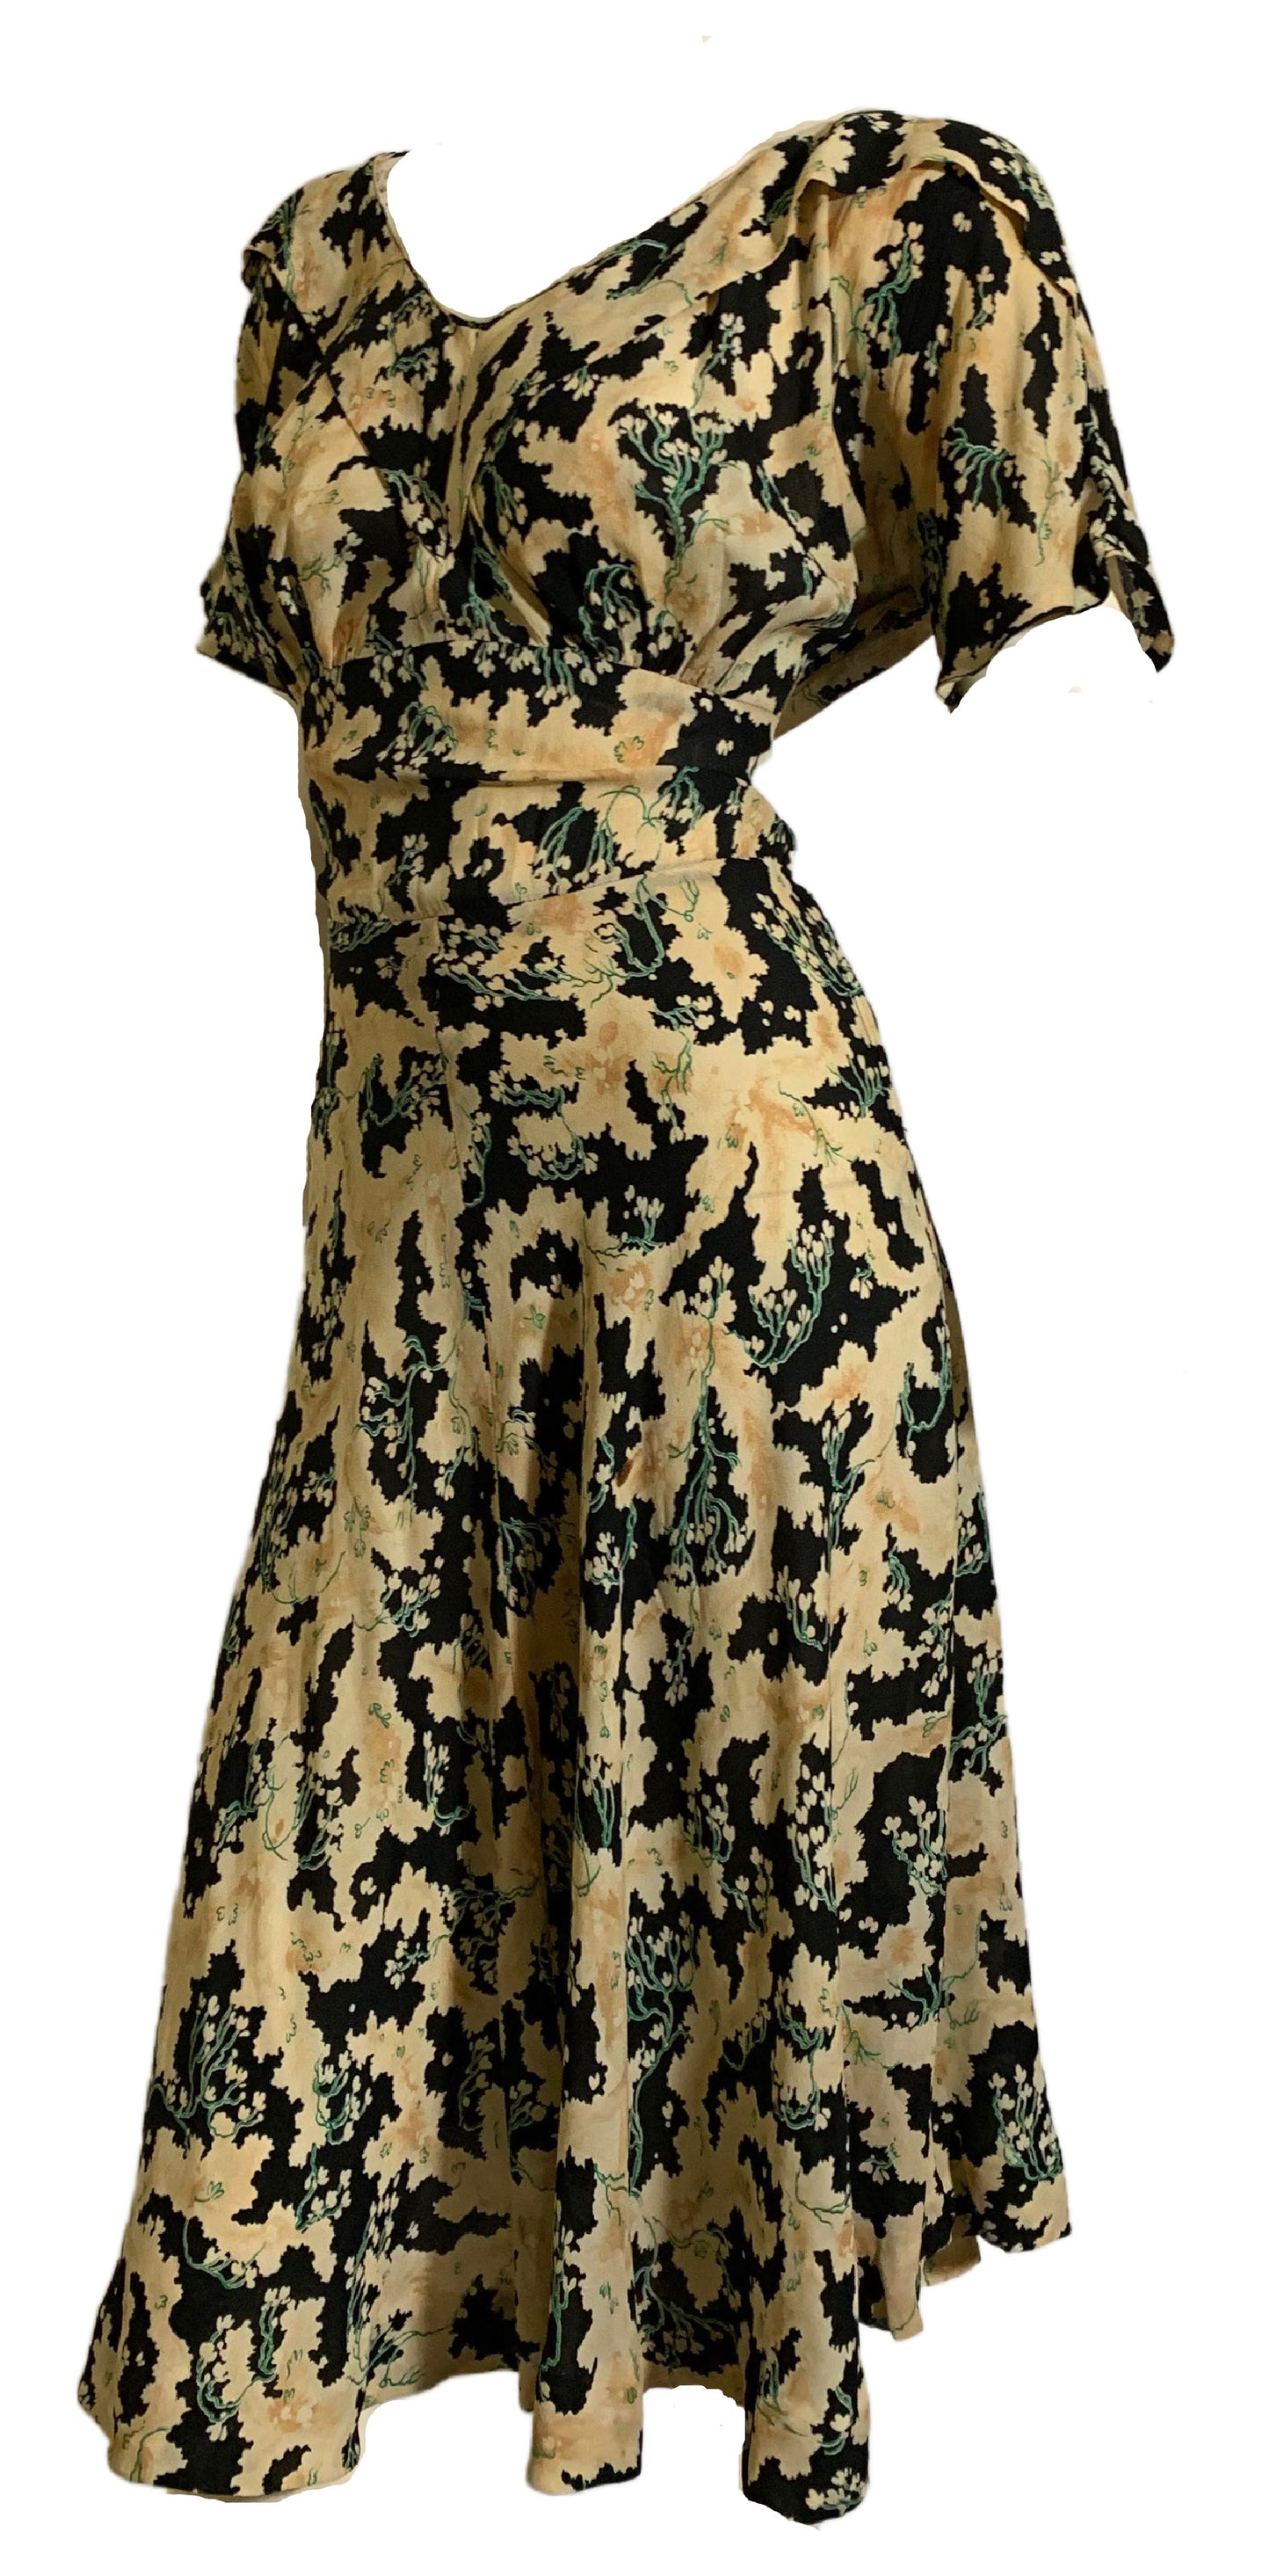 Asian Floral Print Silk Dress and Jacket Set with Bow Tie Collar circa 1930s